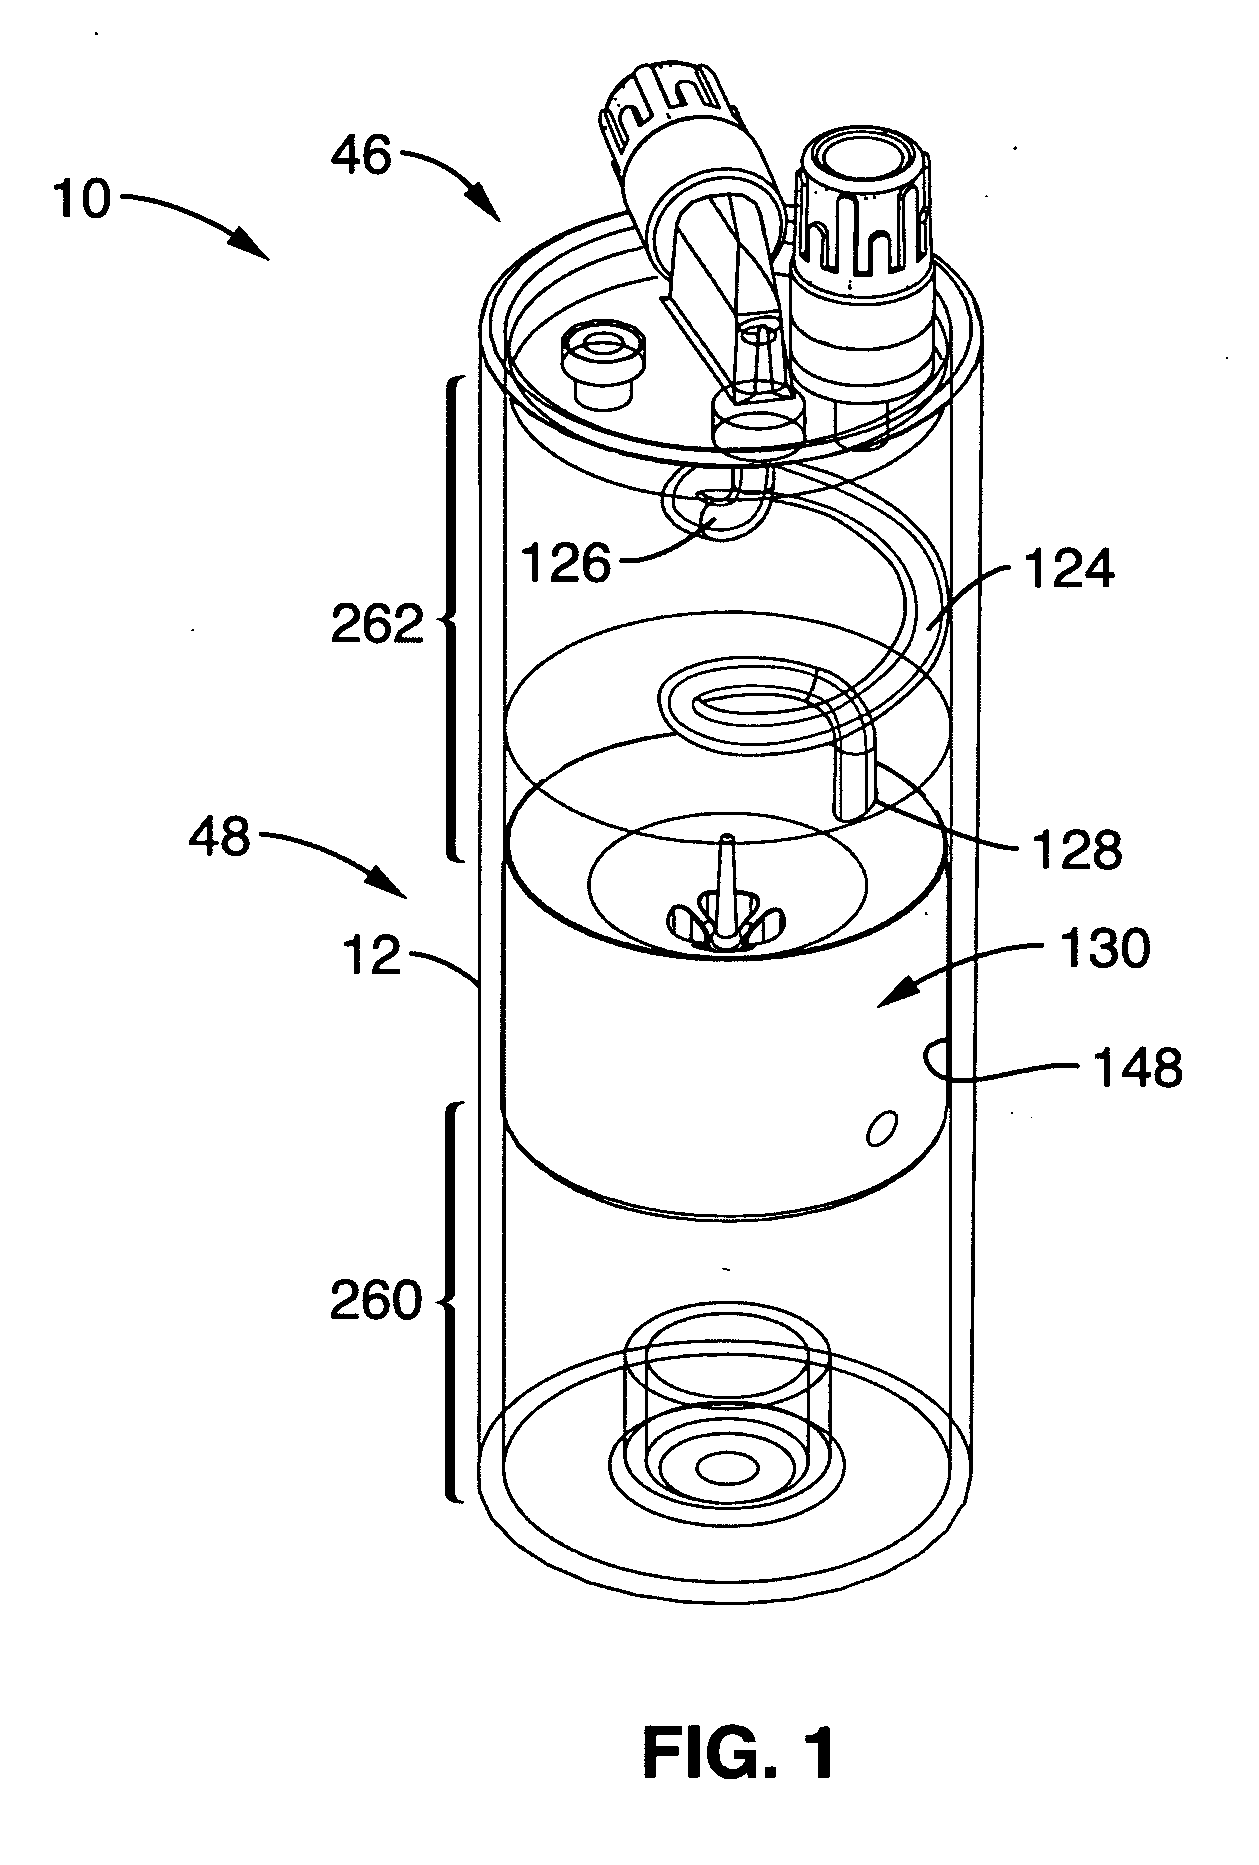 Apparatus and method for separating and isolating components of a biological fluid